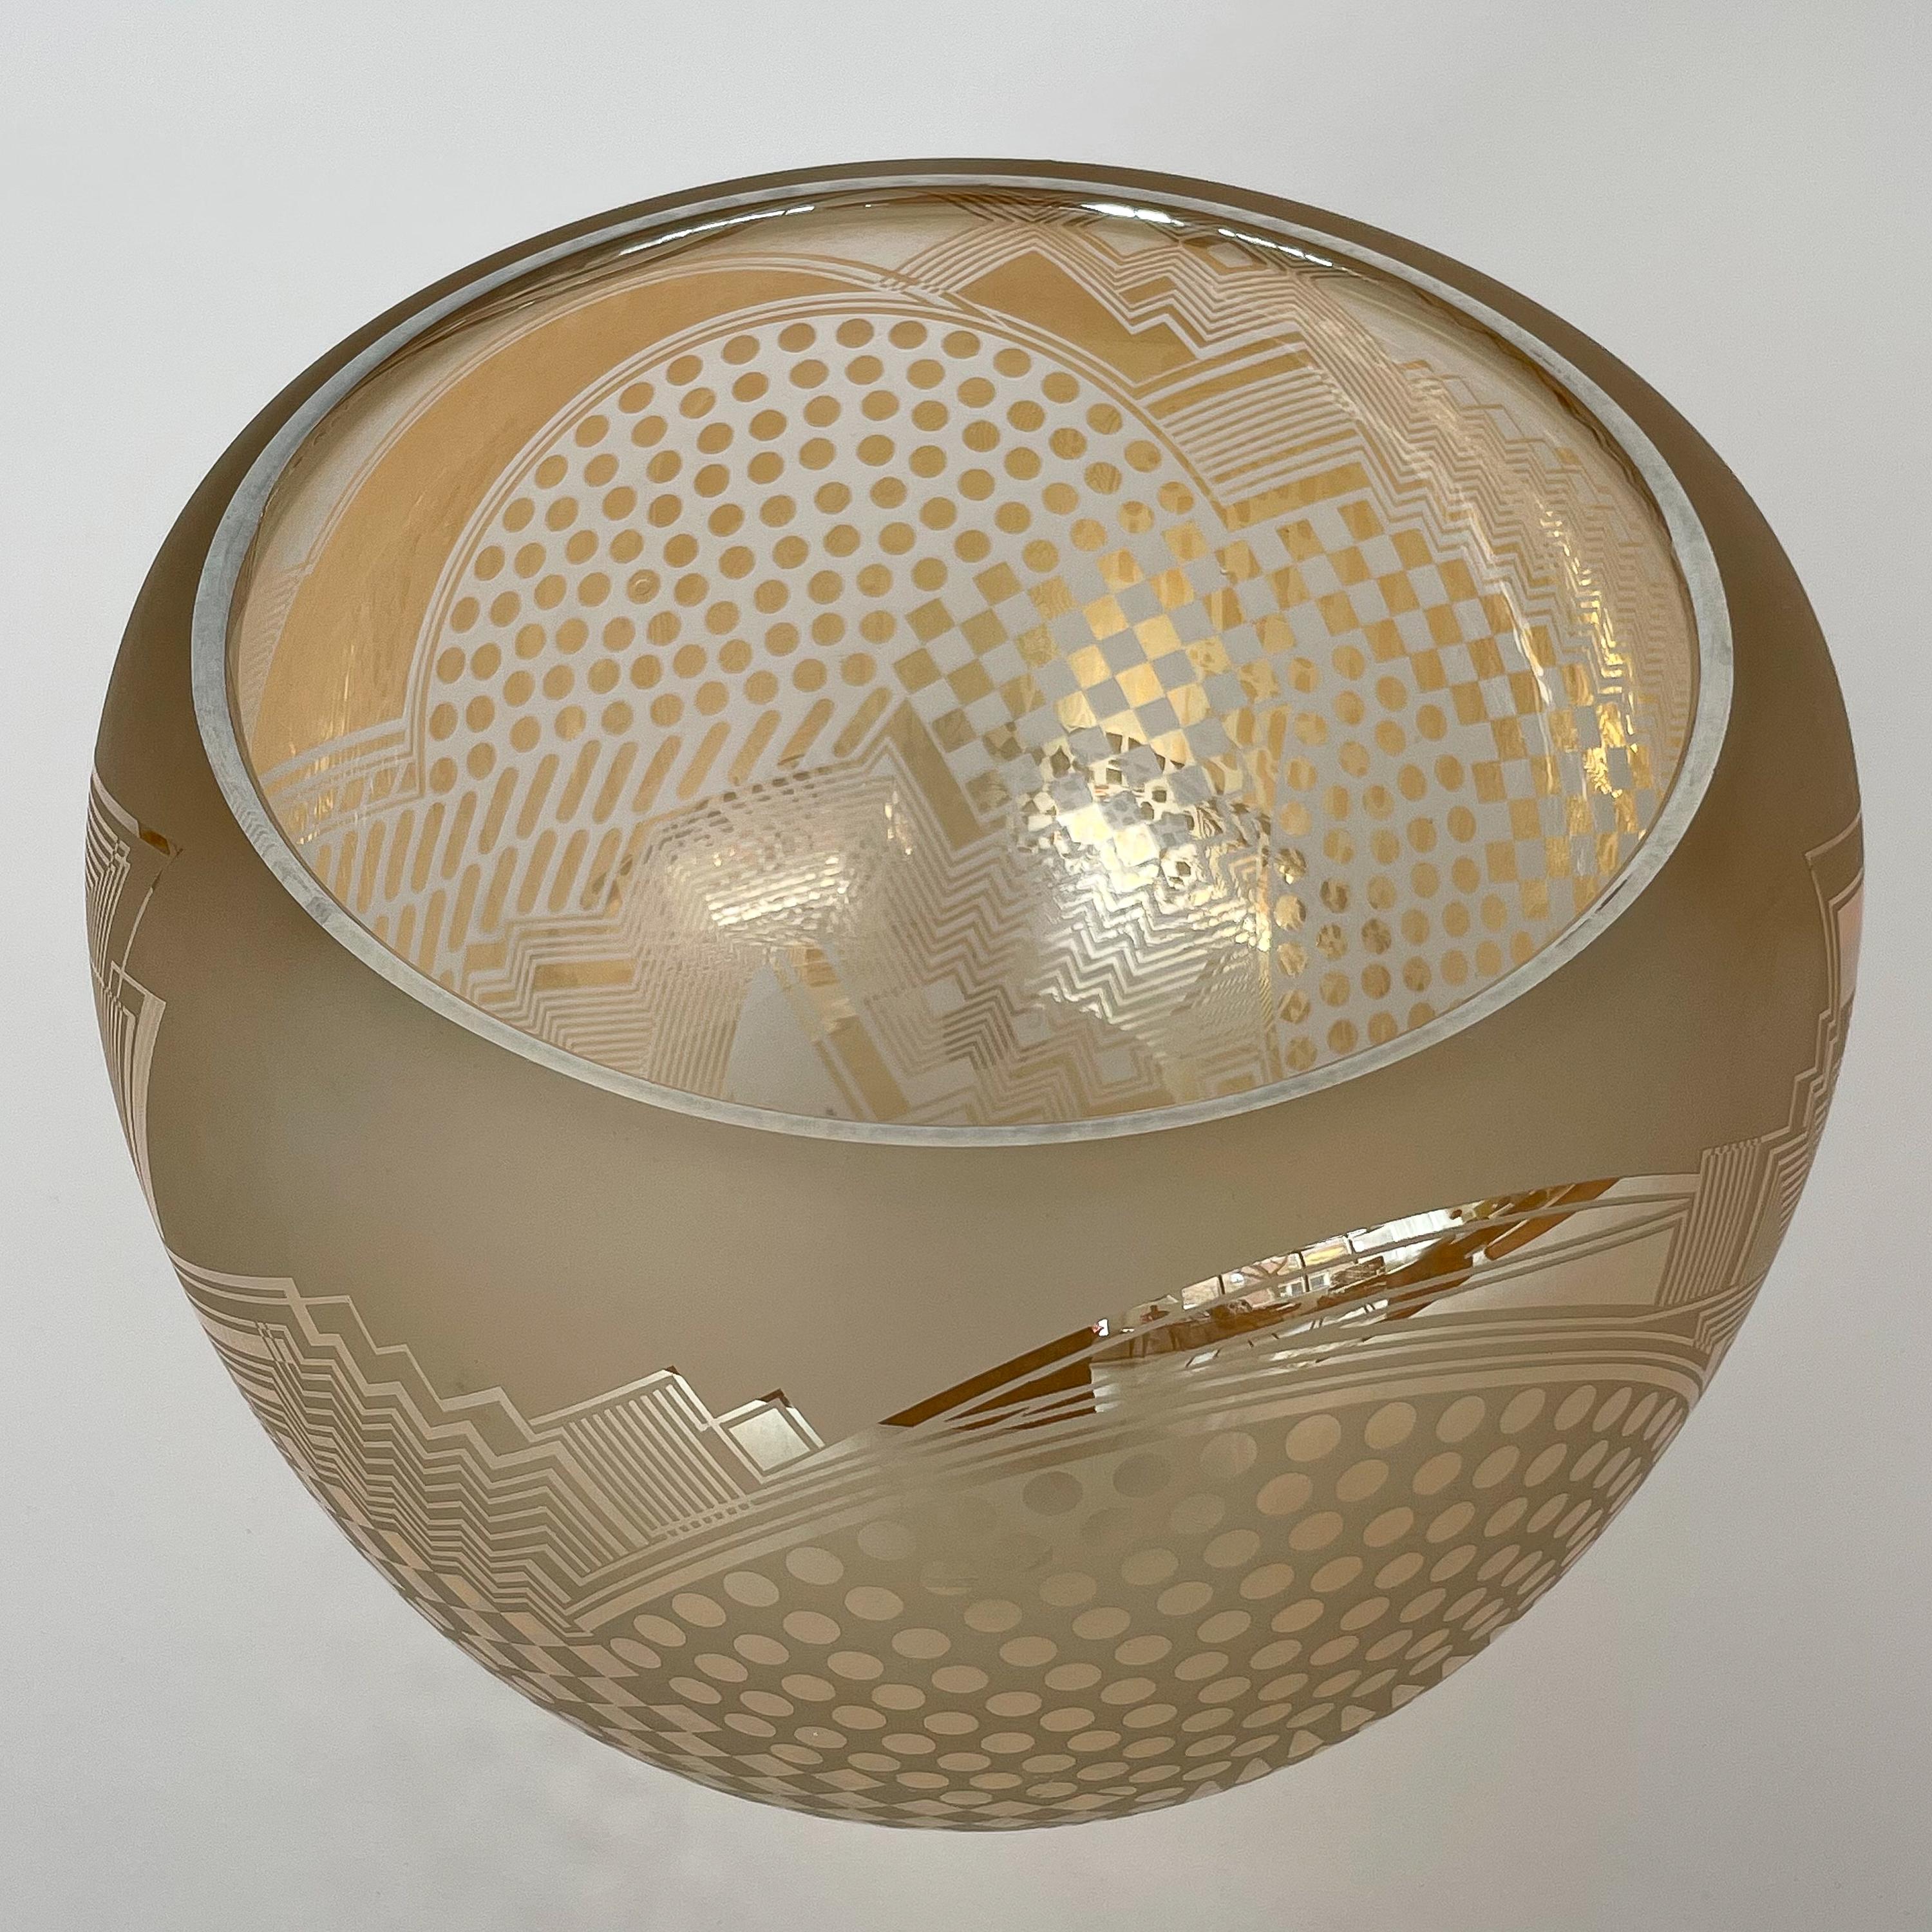 American Michelle Schoen / Bob Toensing Frosted and Gold Mirrored Glass Bowl